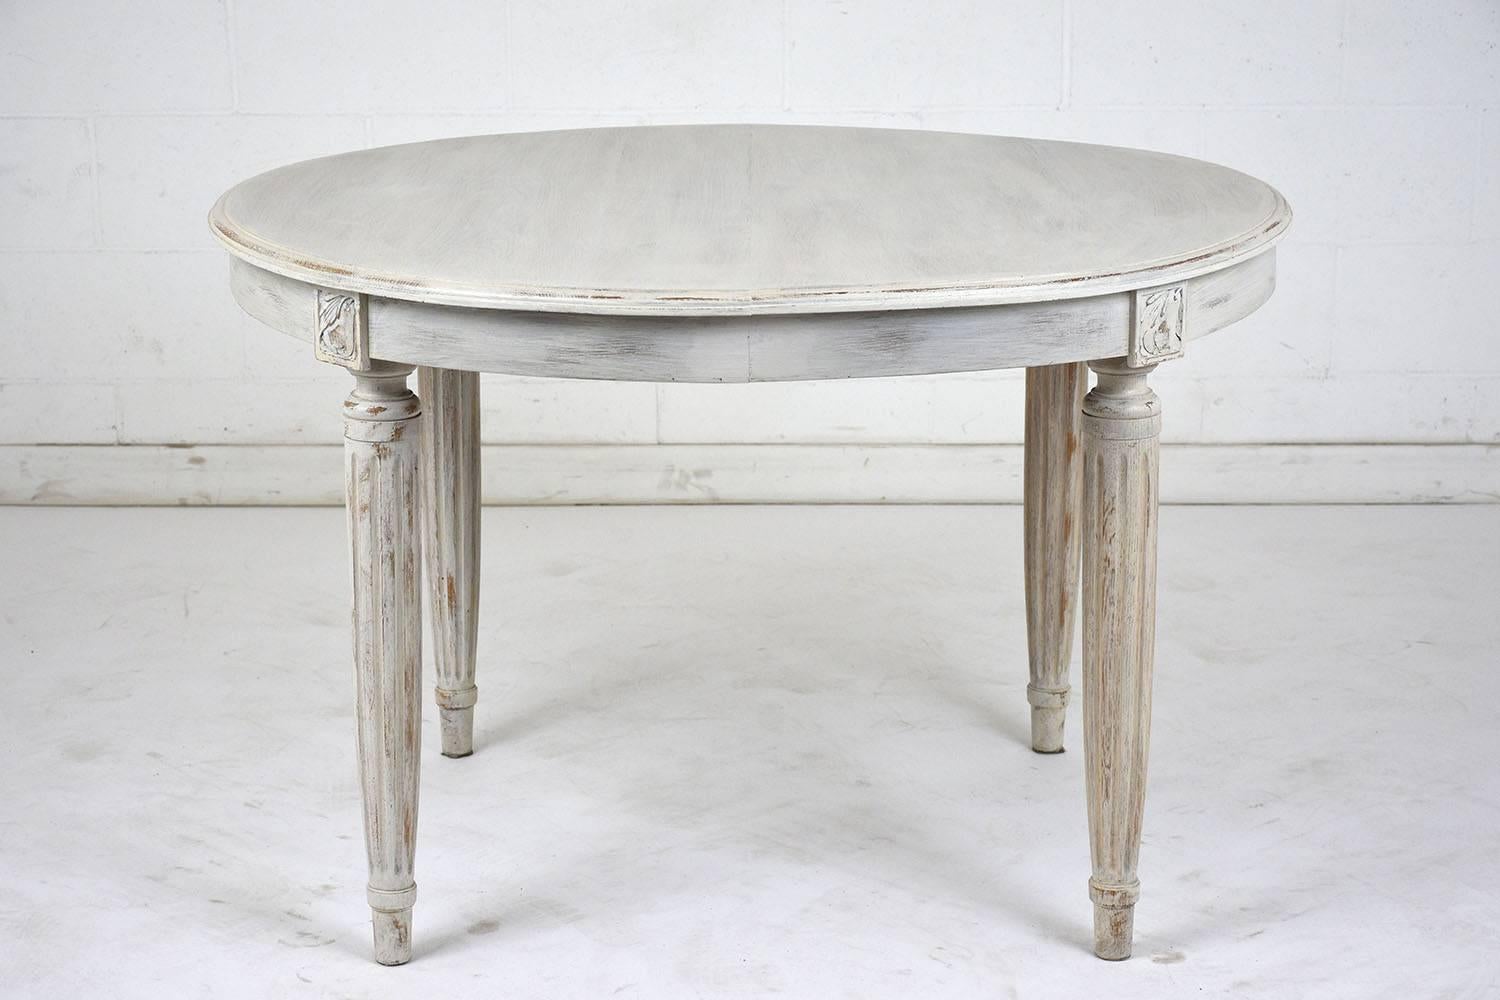 This 1910s Louis XVI-style dining table is made of oak wood painted in an off-white and pale grey color combination with a distressed finish. There is a bevelled edge to the top of the table and carved floral accents along the table skirt. The legs